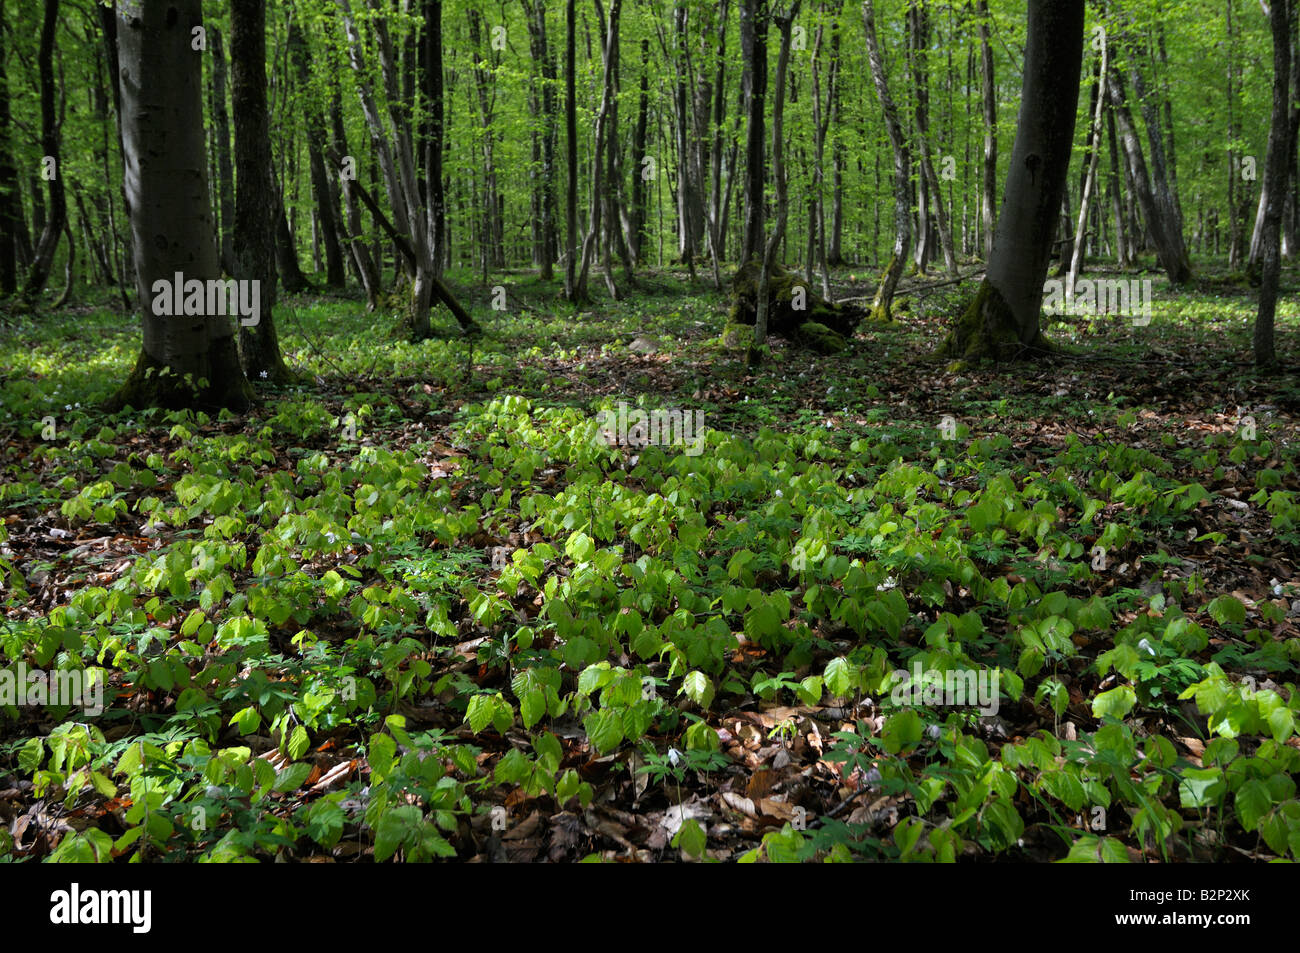 Common Beech, European Beech (Fagus sylvatica). Two year old young plants on forest floor Stock Photo